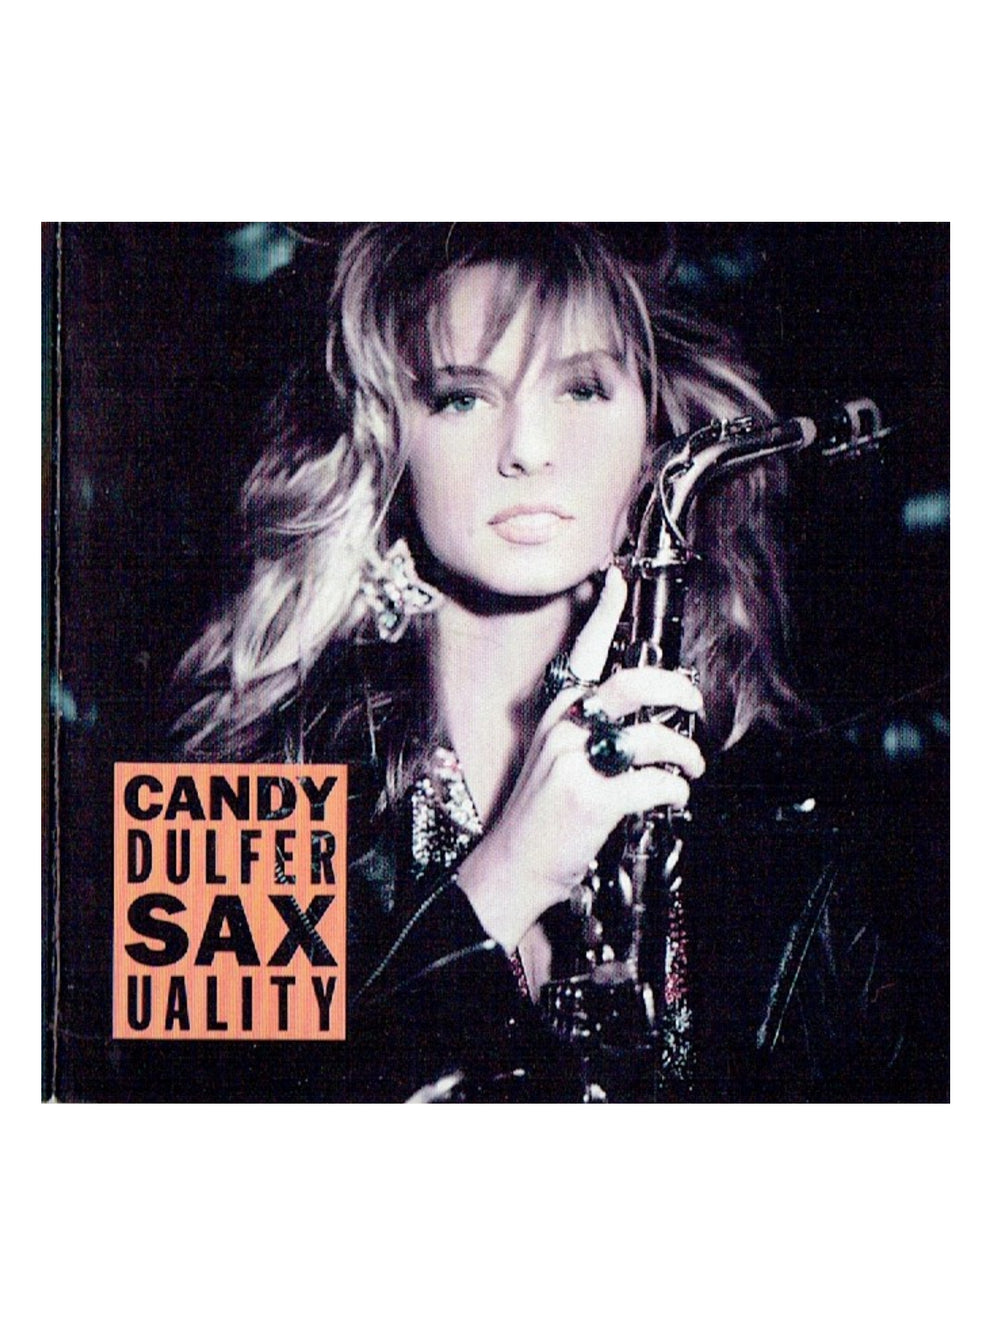 Candy Dulfer Saxuality 3 Inch CD Single 1990 UK Release Prince